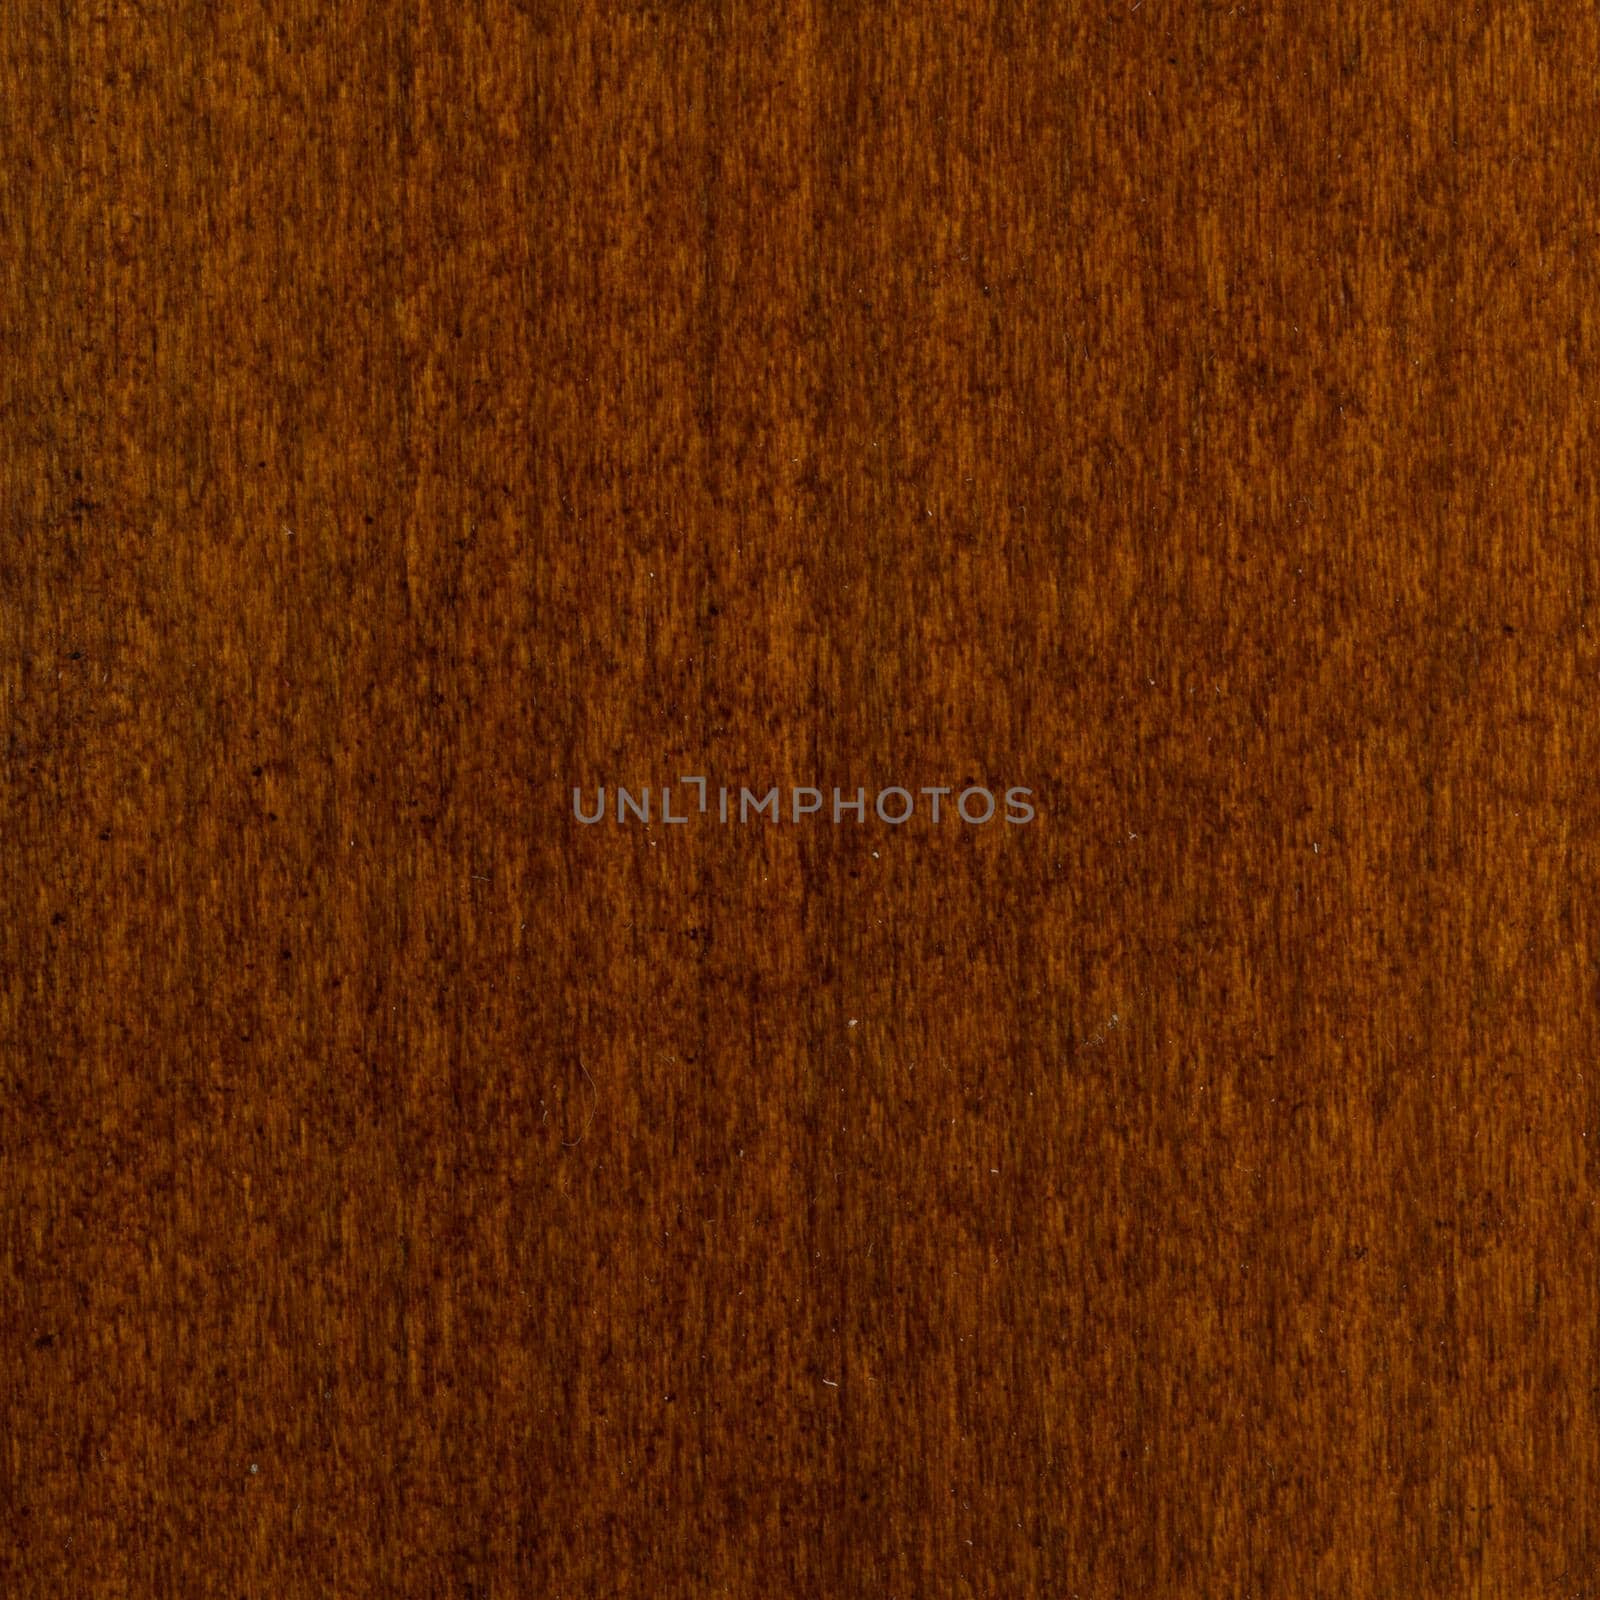 Wood texture for background by nikitabuida